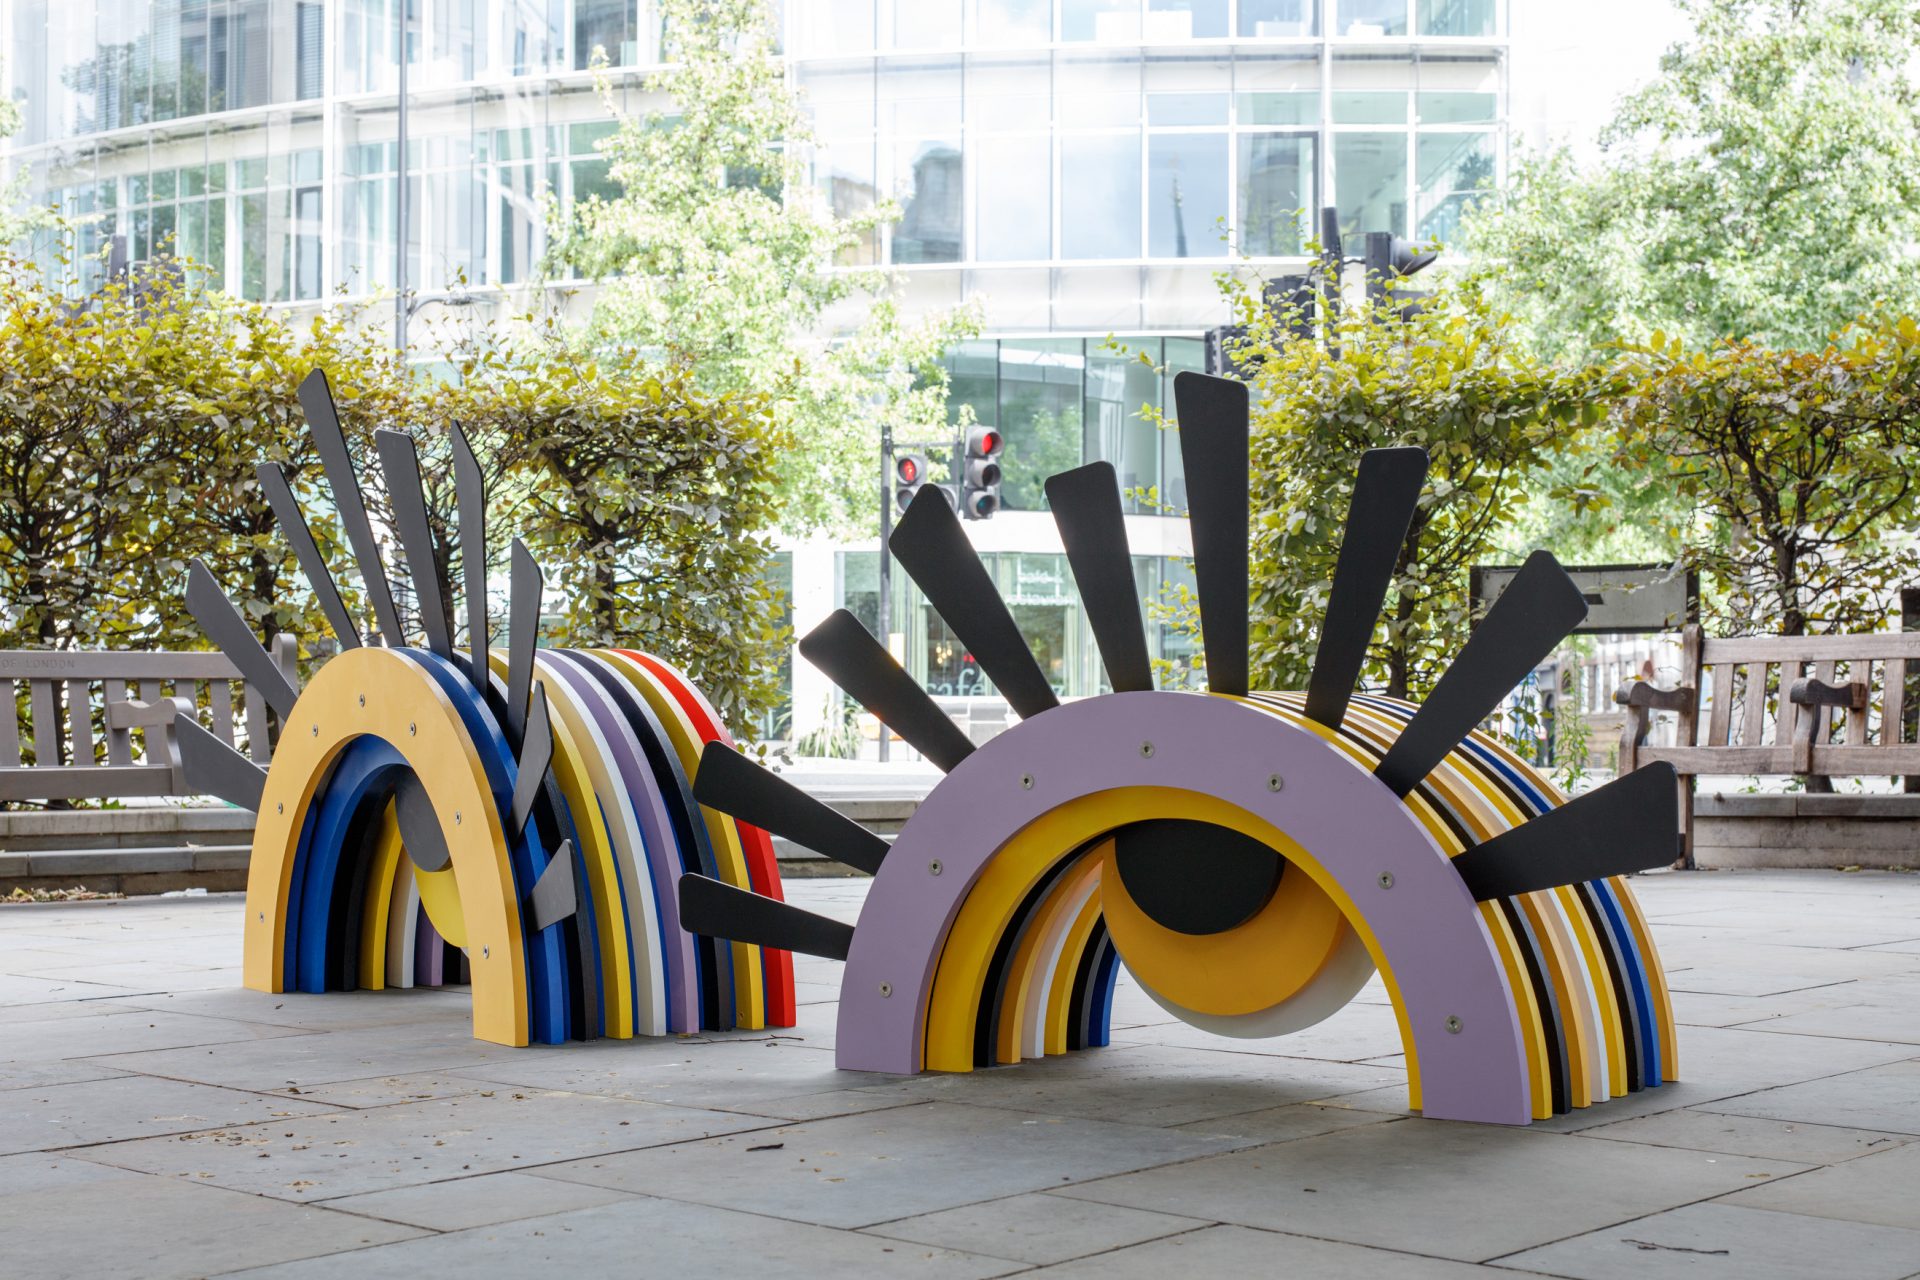 City Benches: New benches revealed in Cheapside